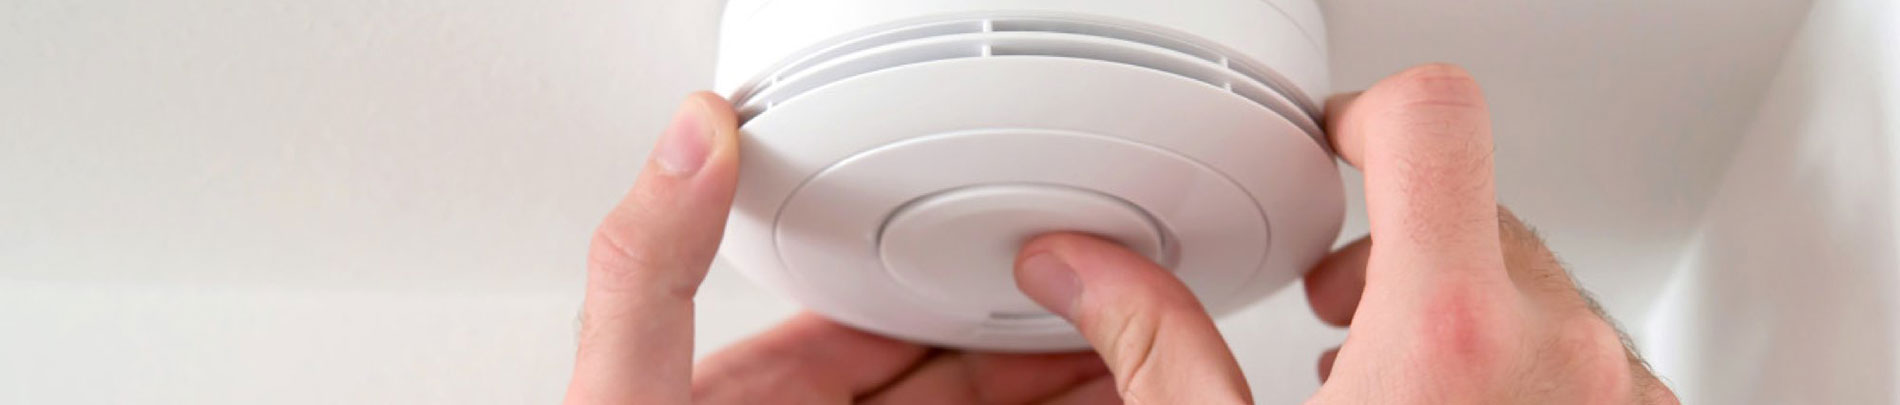 A person's hand reaches up to press the test button on a smoke alarm.